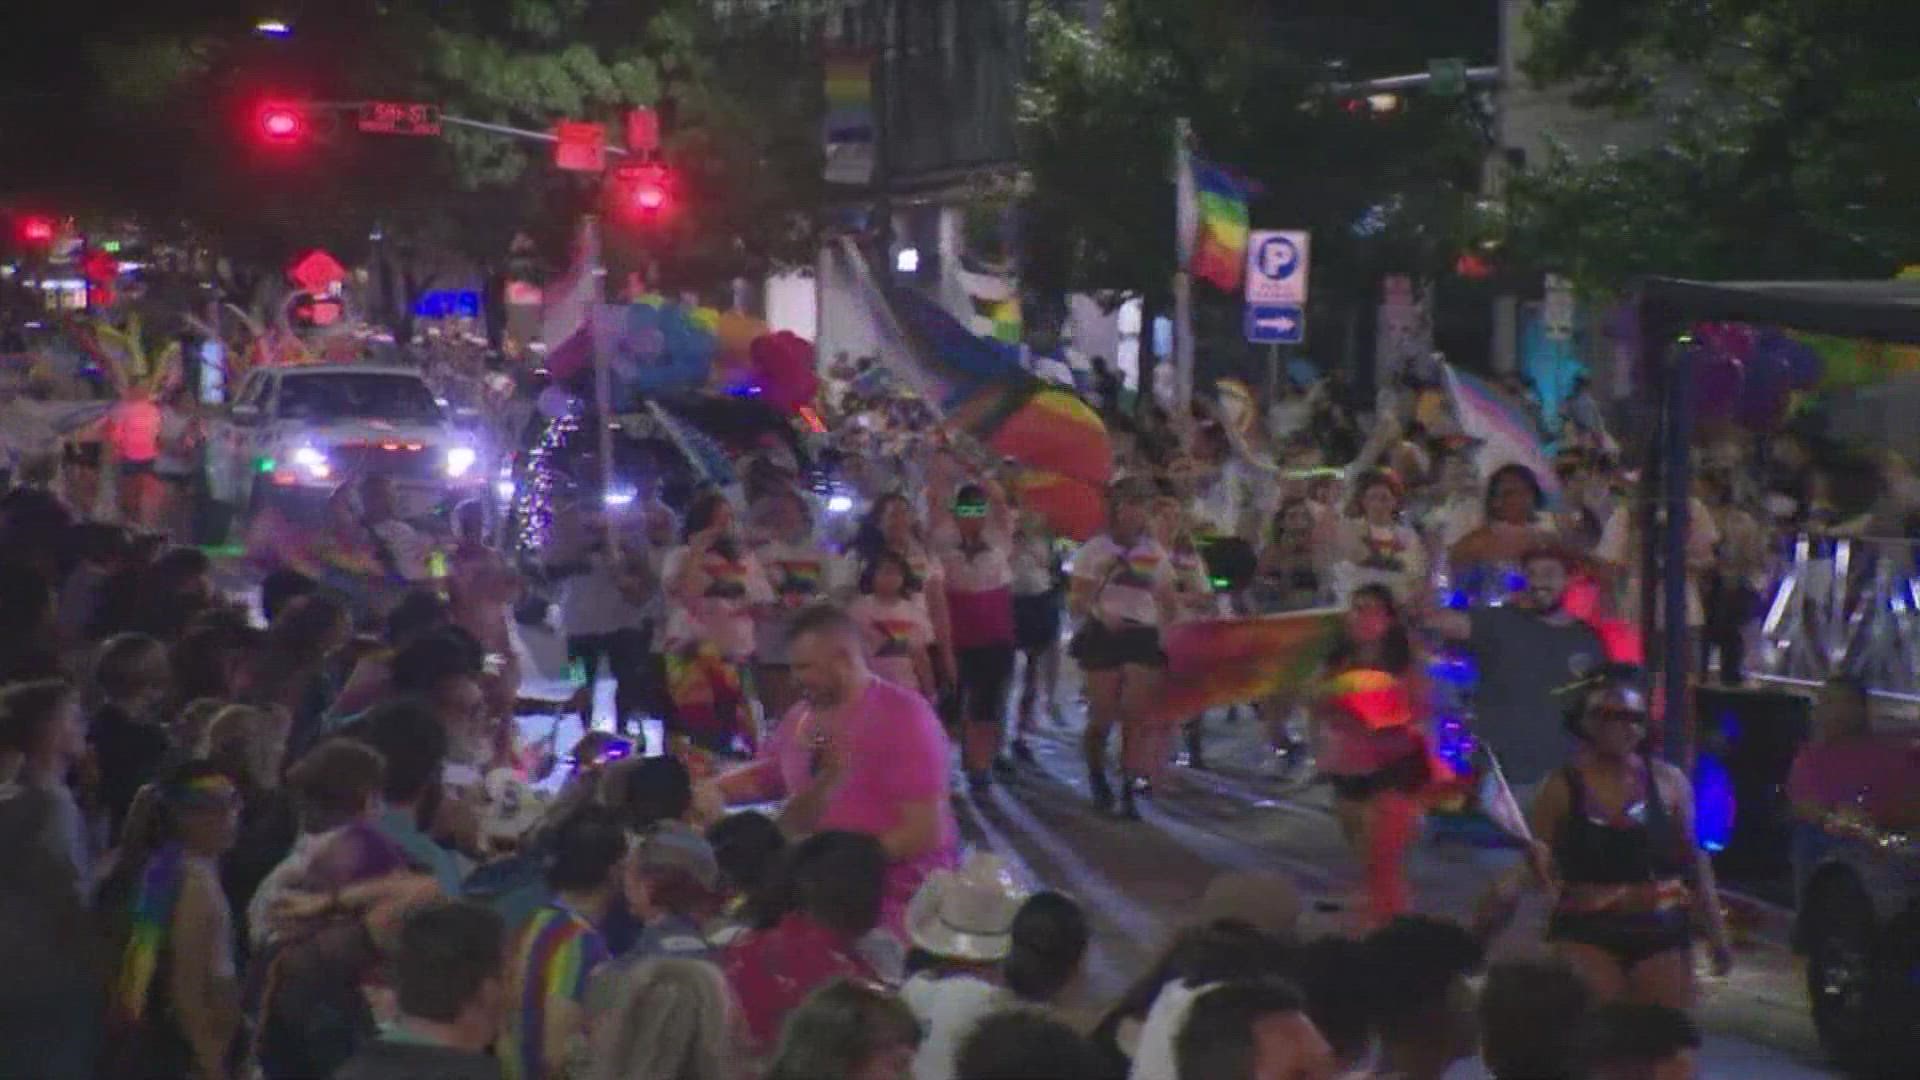 Austinites and visitors from out of town gathered to celebrate the LGBTQ+ community downtown on Saturday for the Austin Pride Festival and Parade.